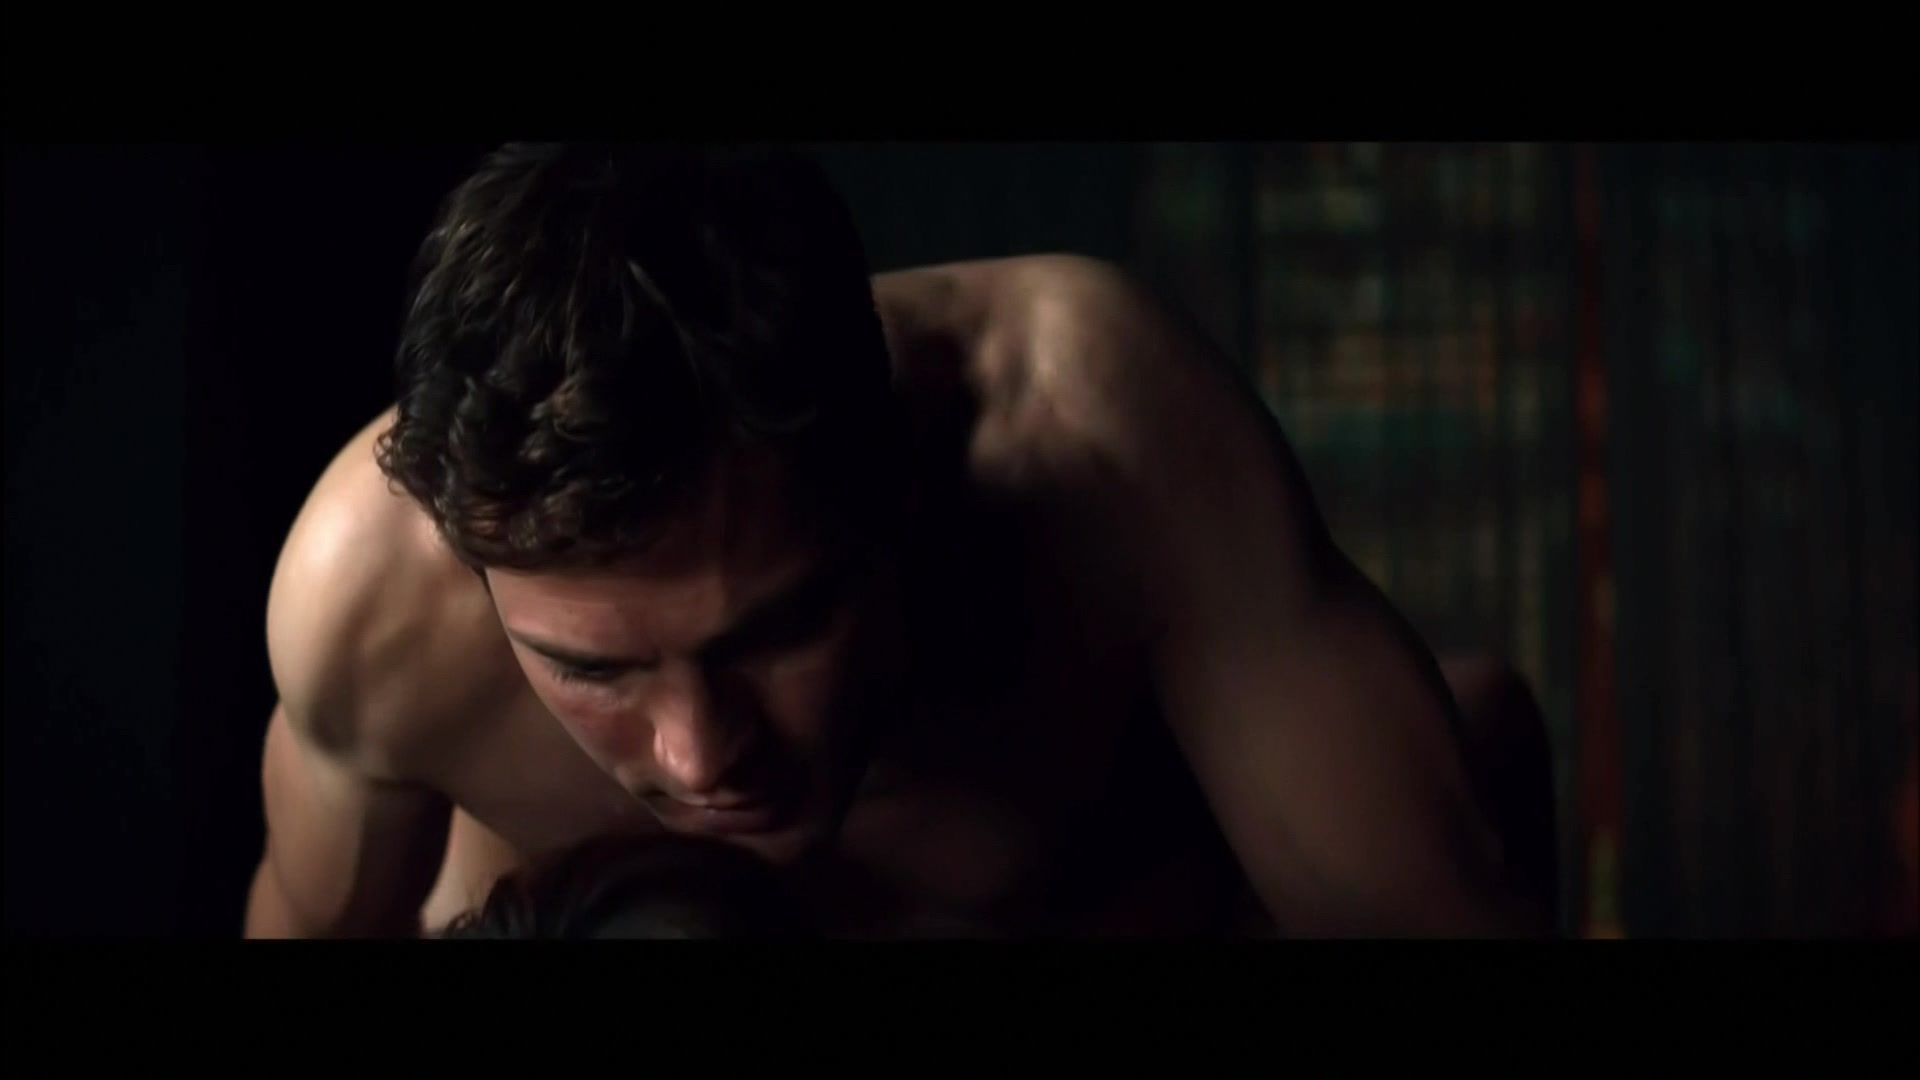 New FIFTY SHADES OF GREY Clip Offers More Talk No Action.